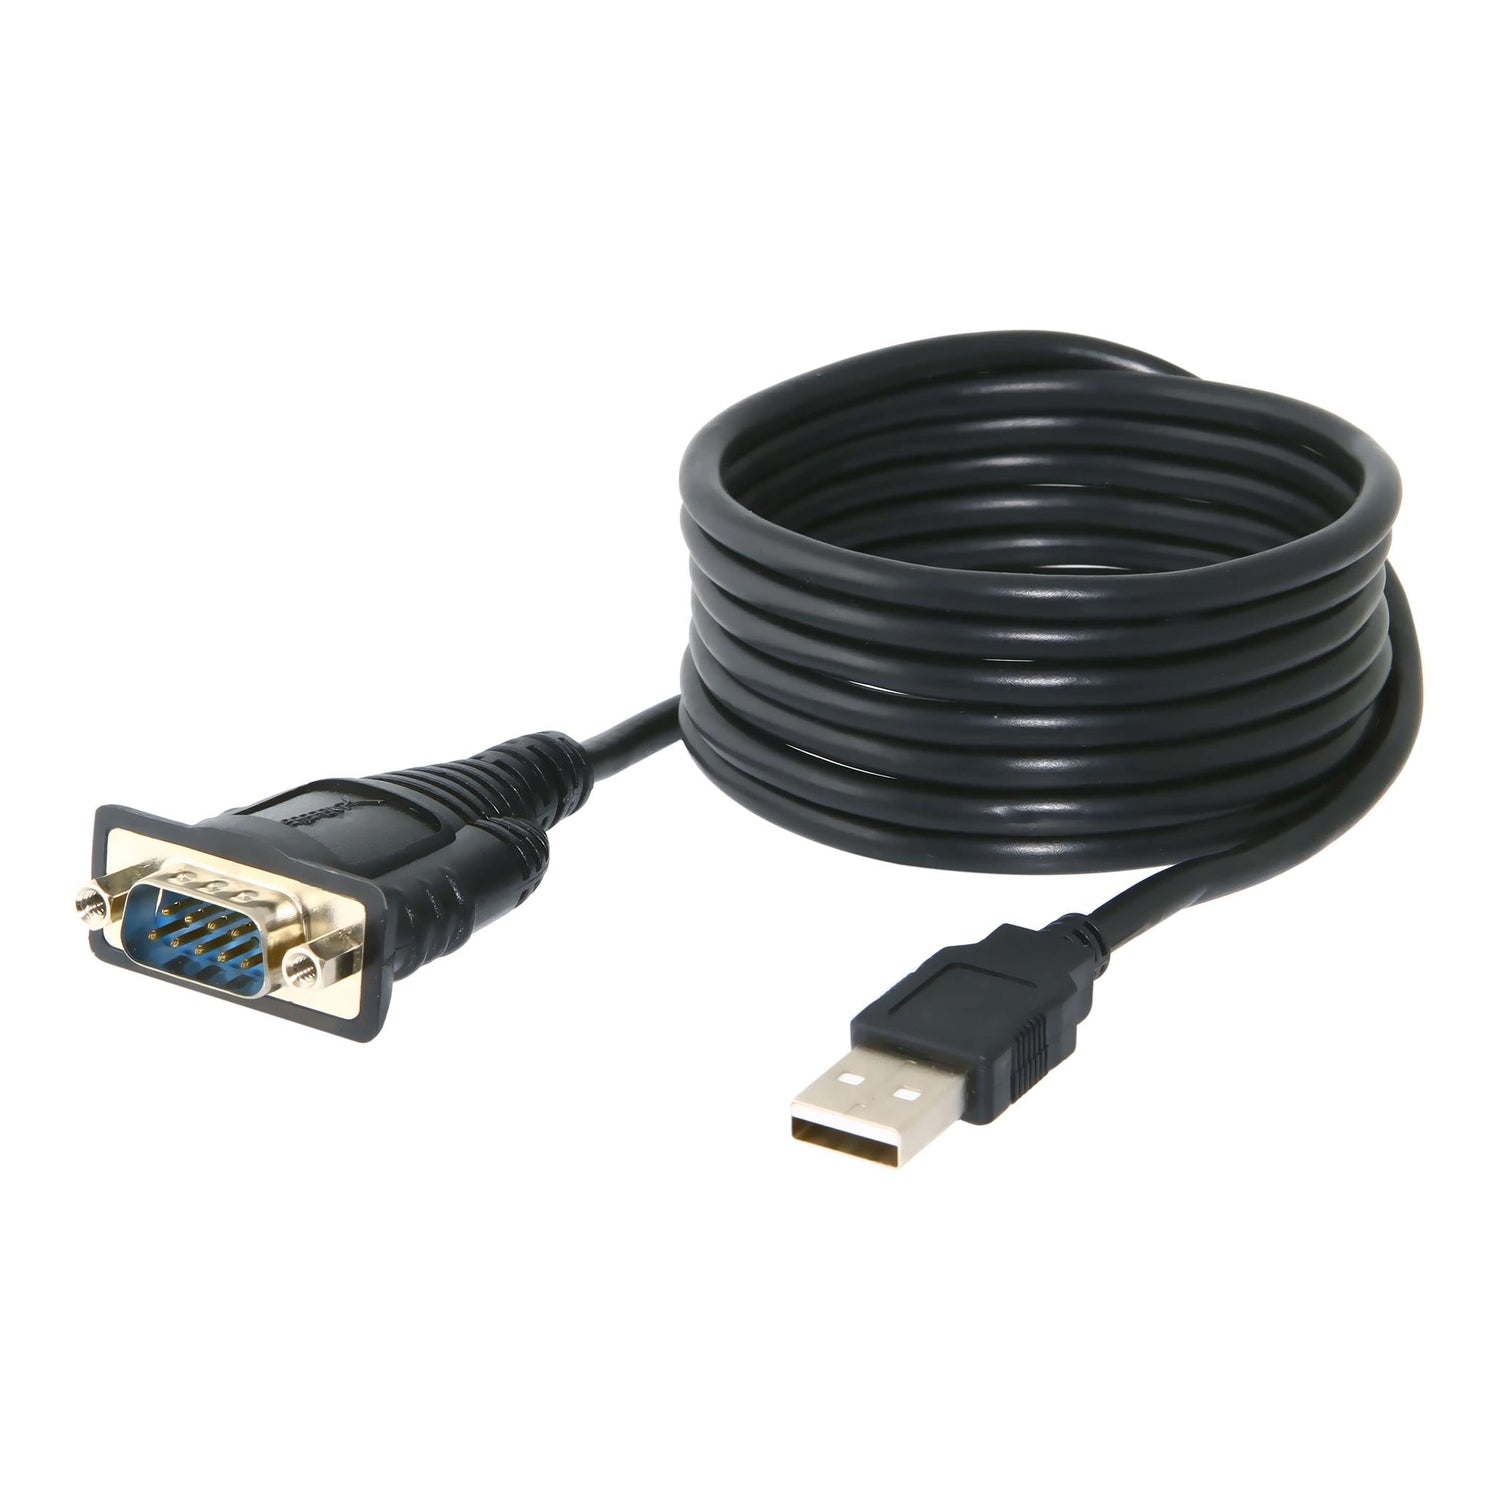 Sabrent SBT-FTDI 6Ft USB Type A to Male Serial 9 PIN DB9 RS232 Cable Black